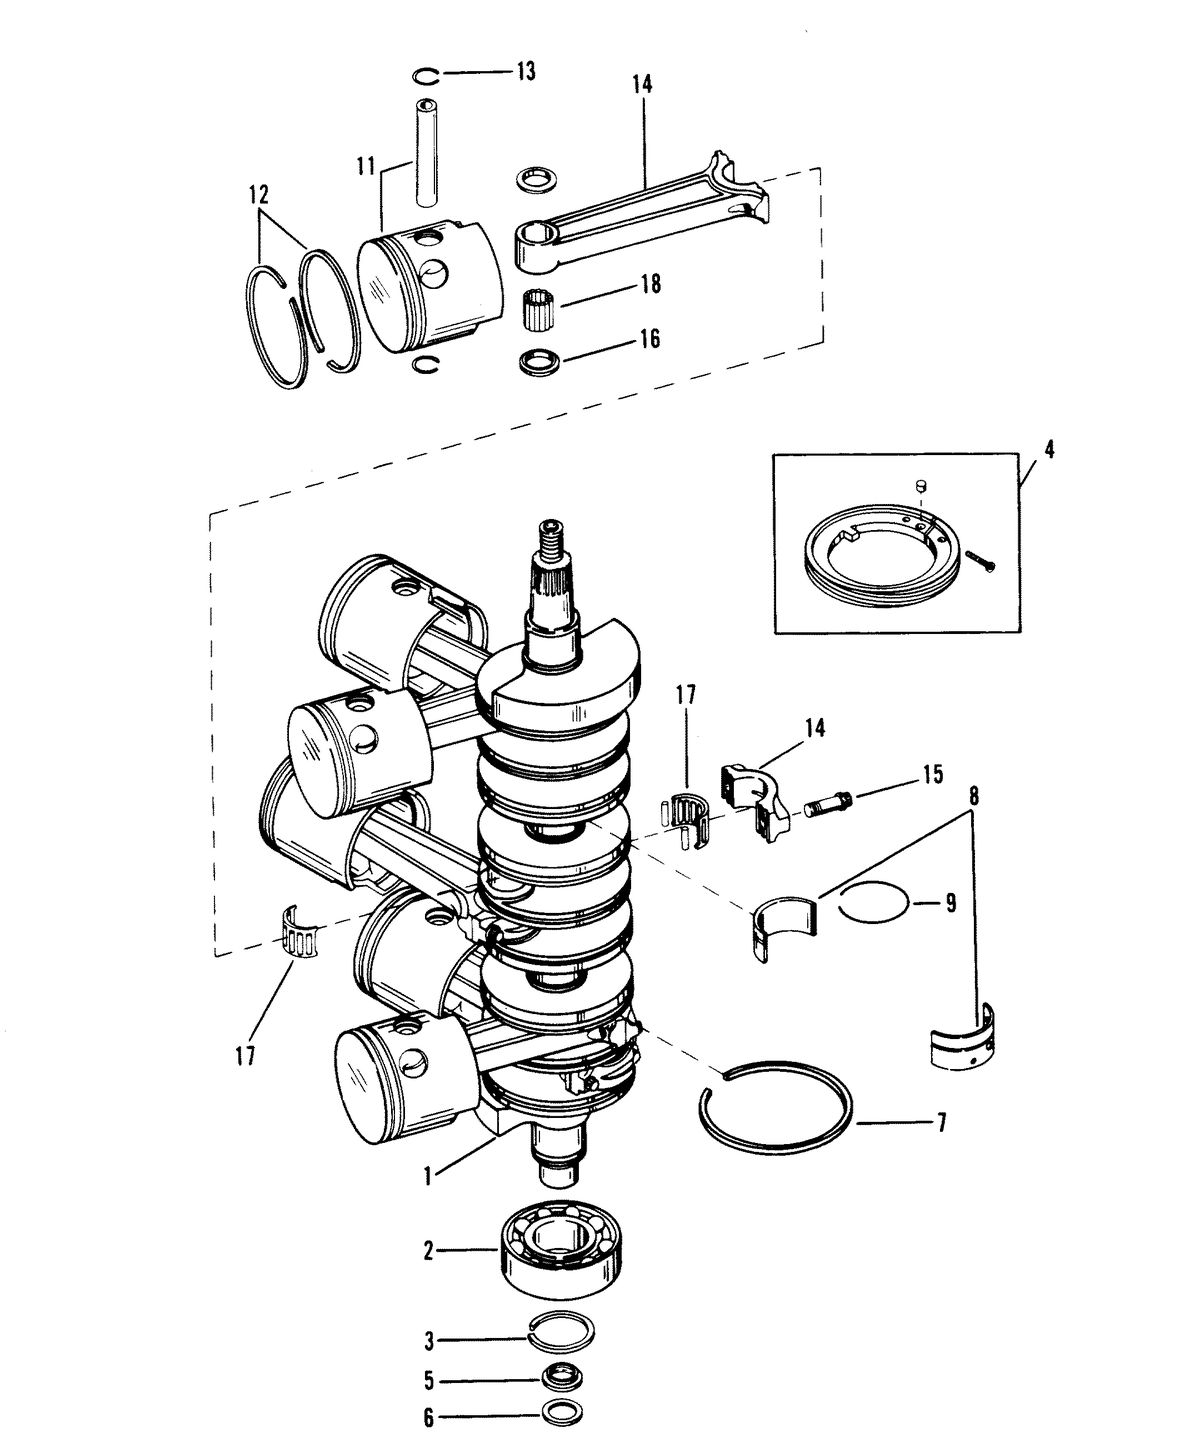 RACE OUTBOARD XR-2 CRANKSHAFT, PISTONS AND CONNECTING RODS